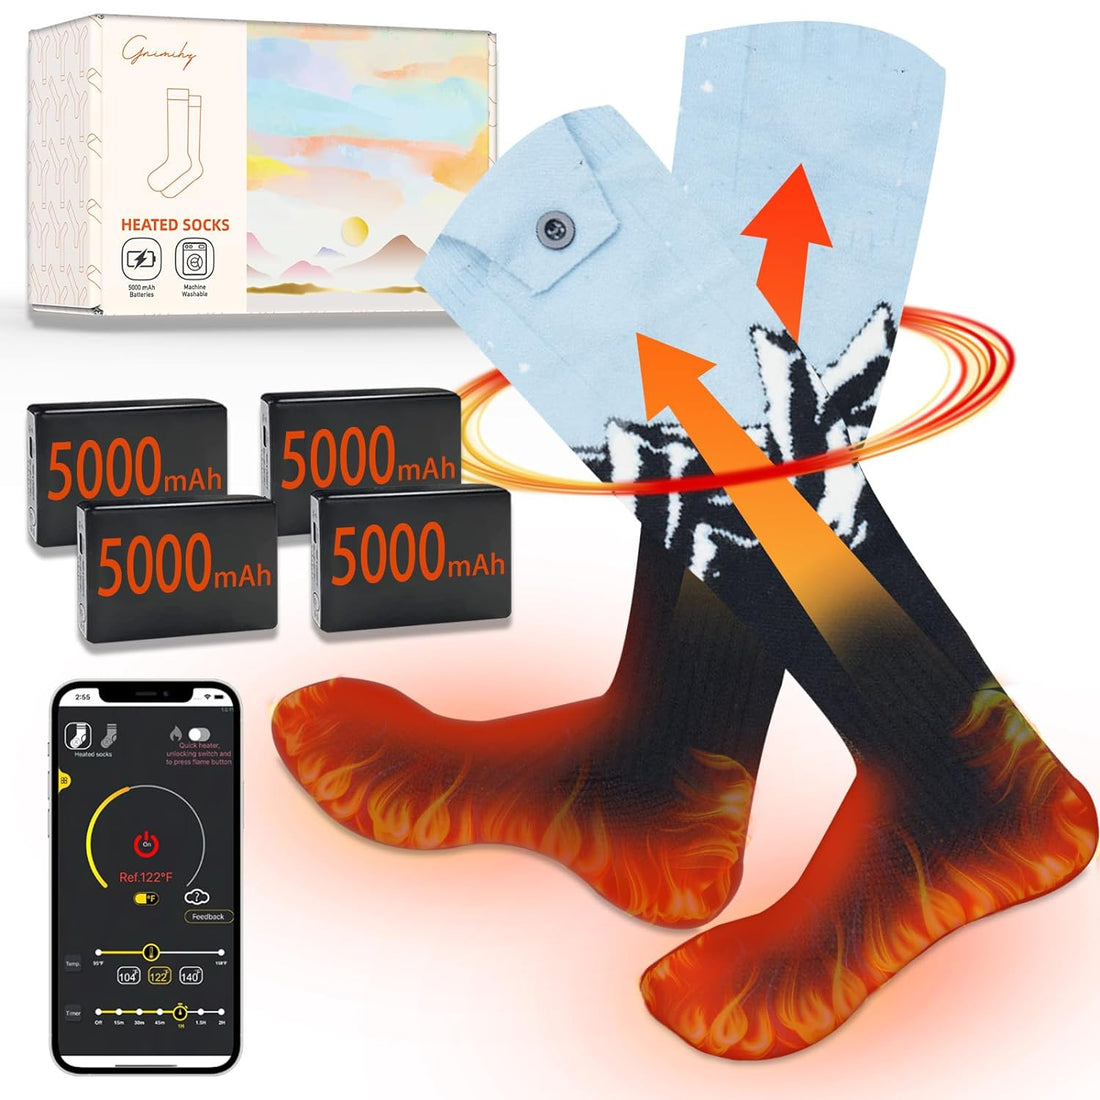 Gnimihz Heated Socks for Men Women - with Rechargeable Battery 5000mAh 5V, APP, 2 Set of Battery